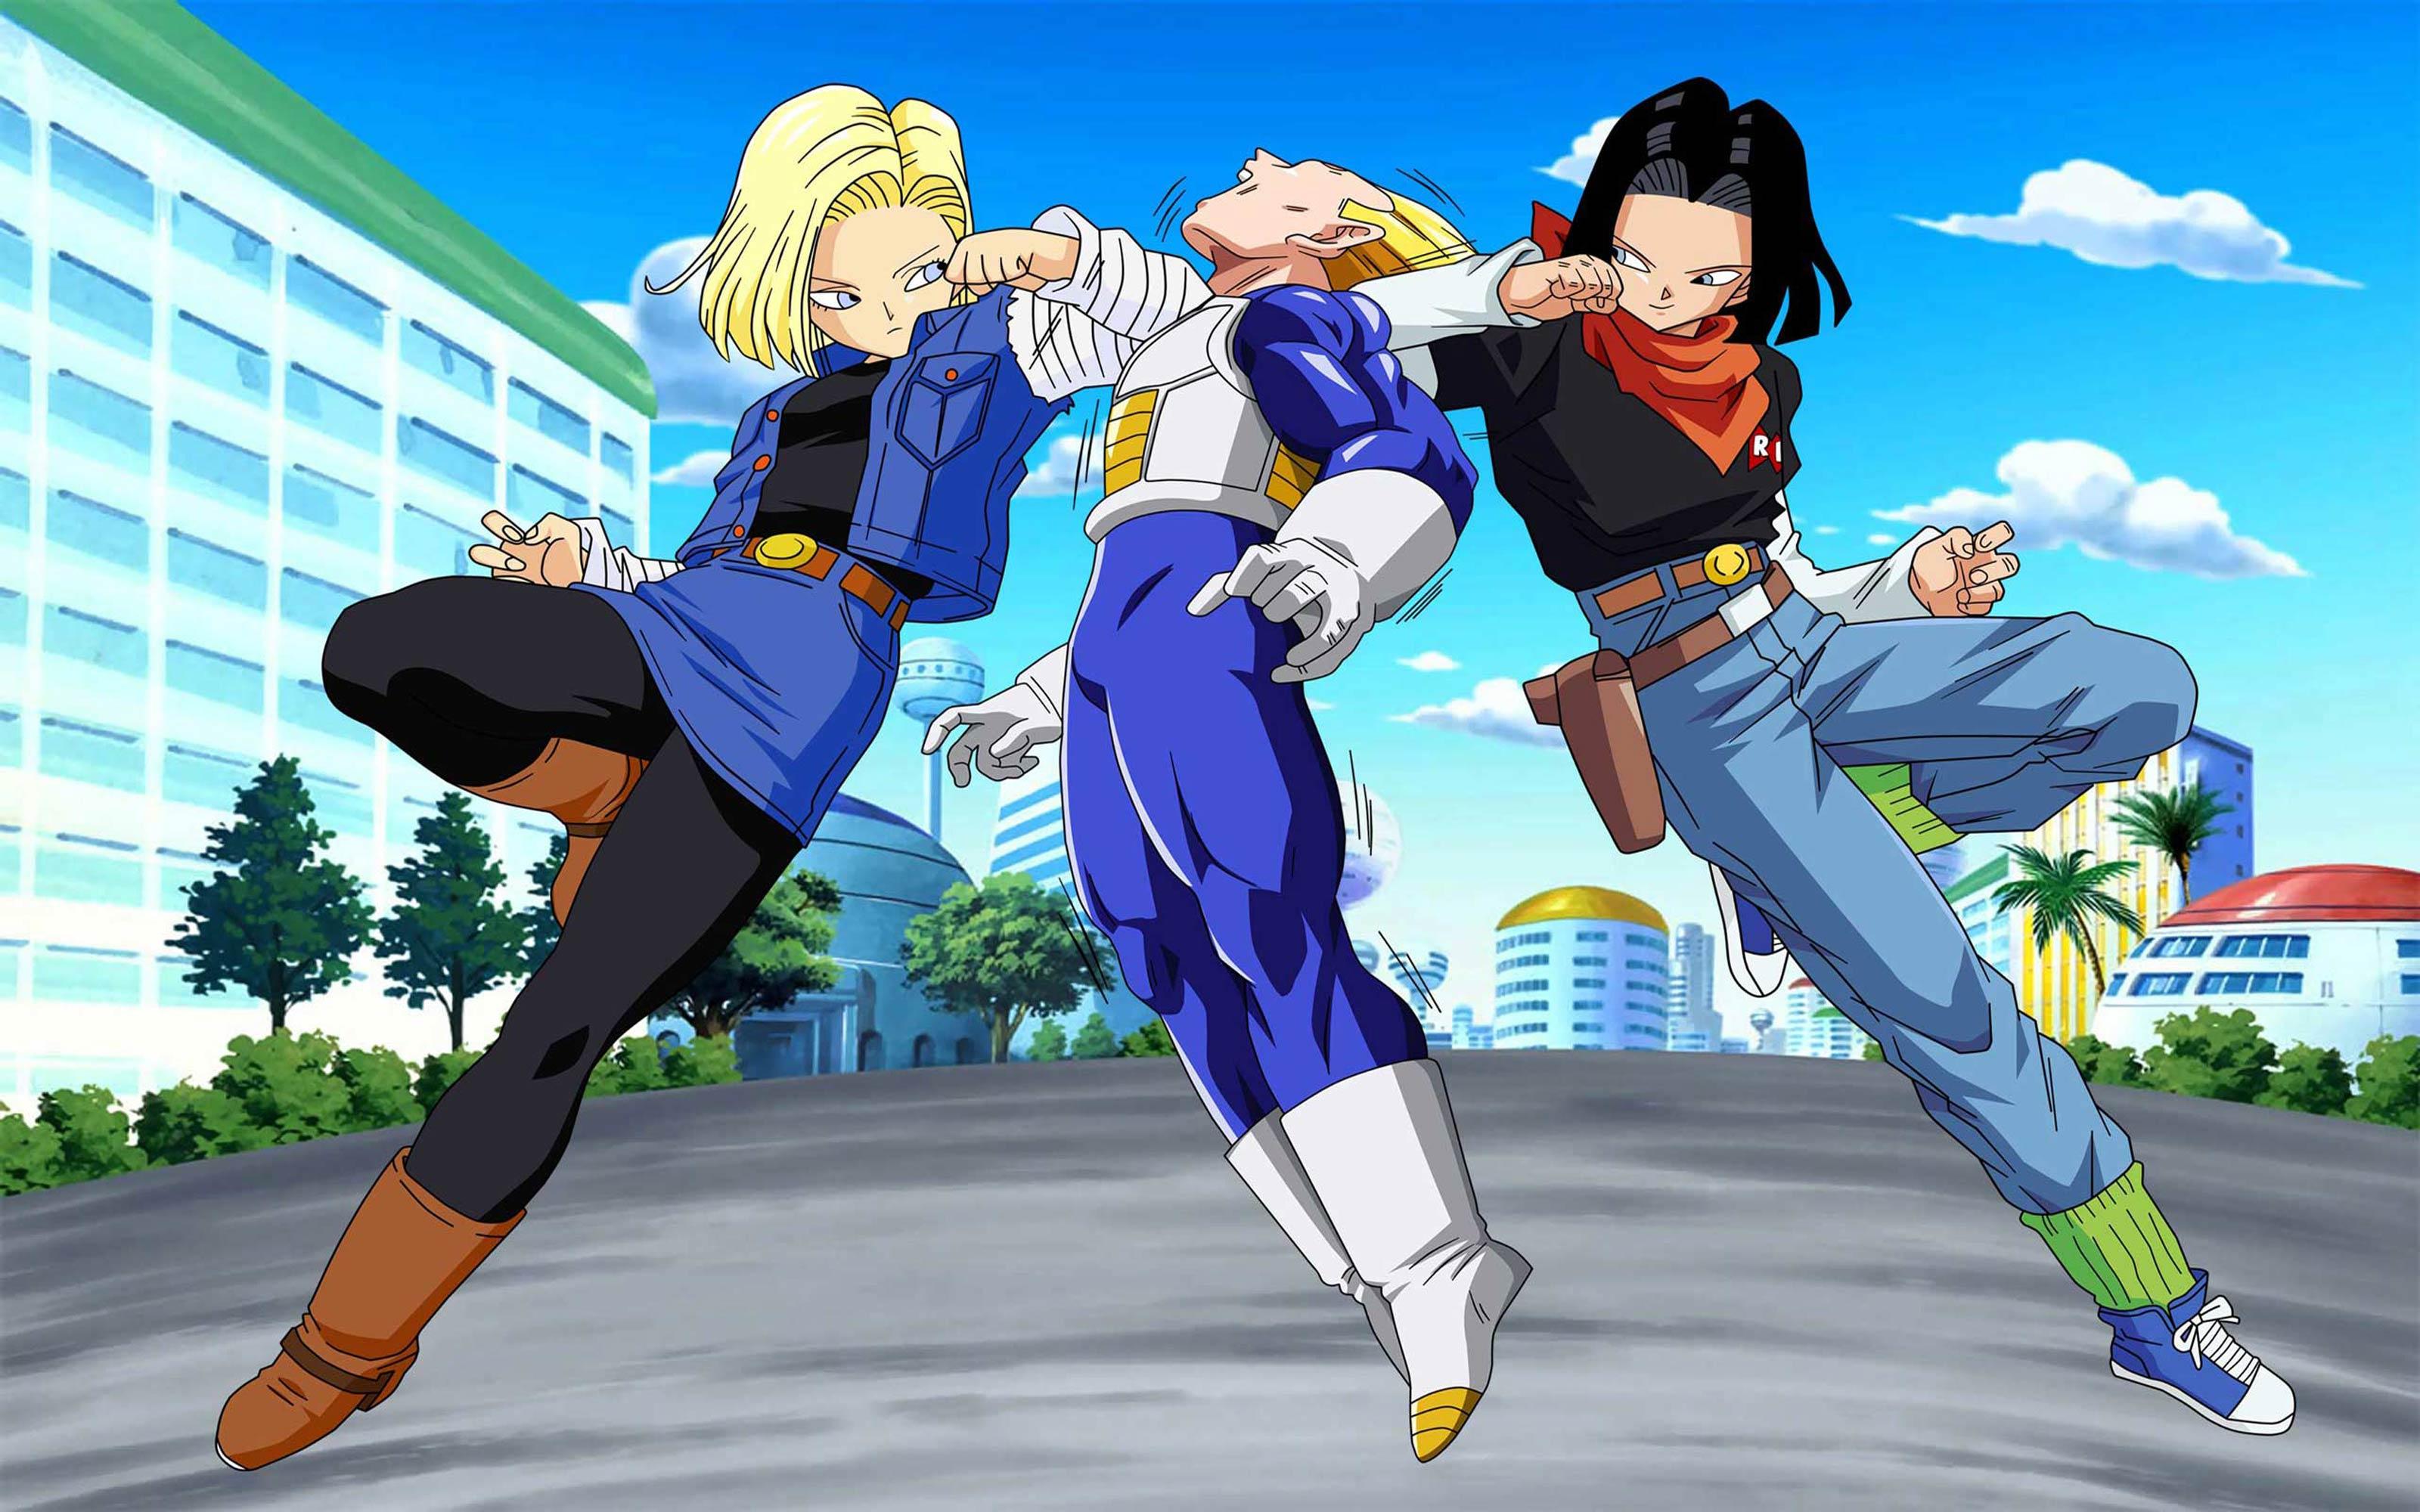 Free Dbz Android 18 And 17 Dbz Androids Wallpaper, 18